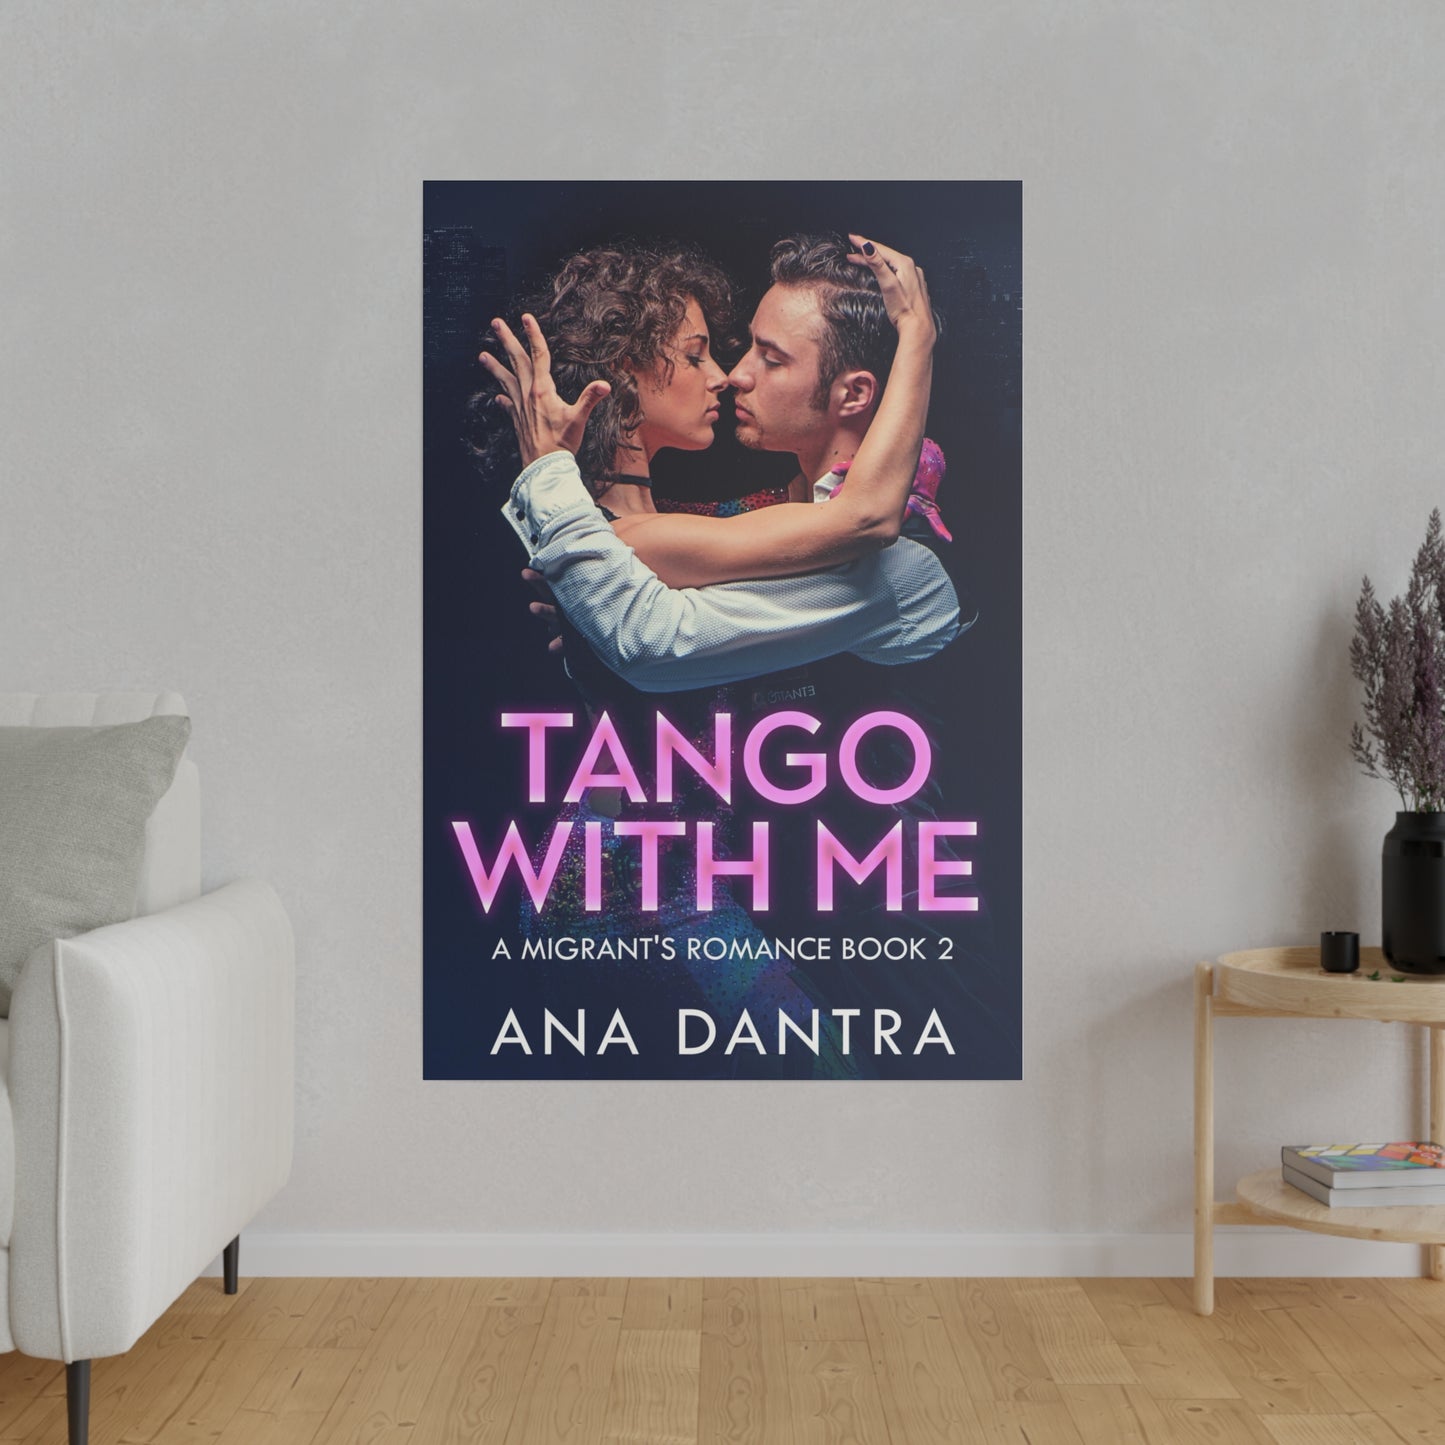 Tango With Me - Canvas